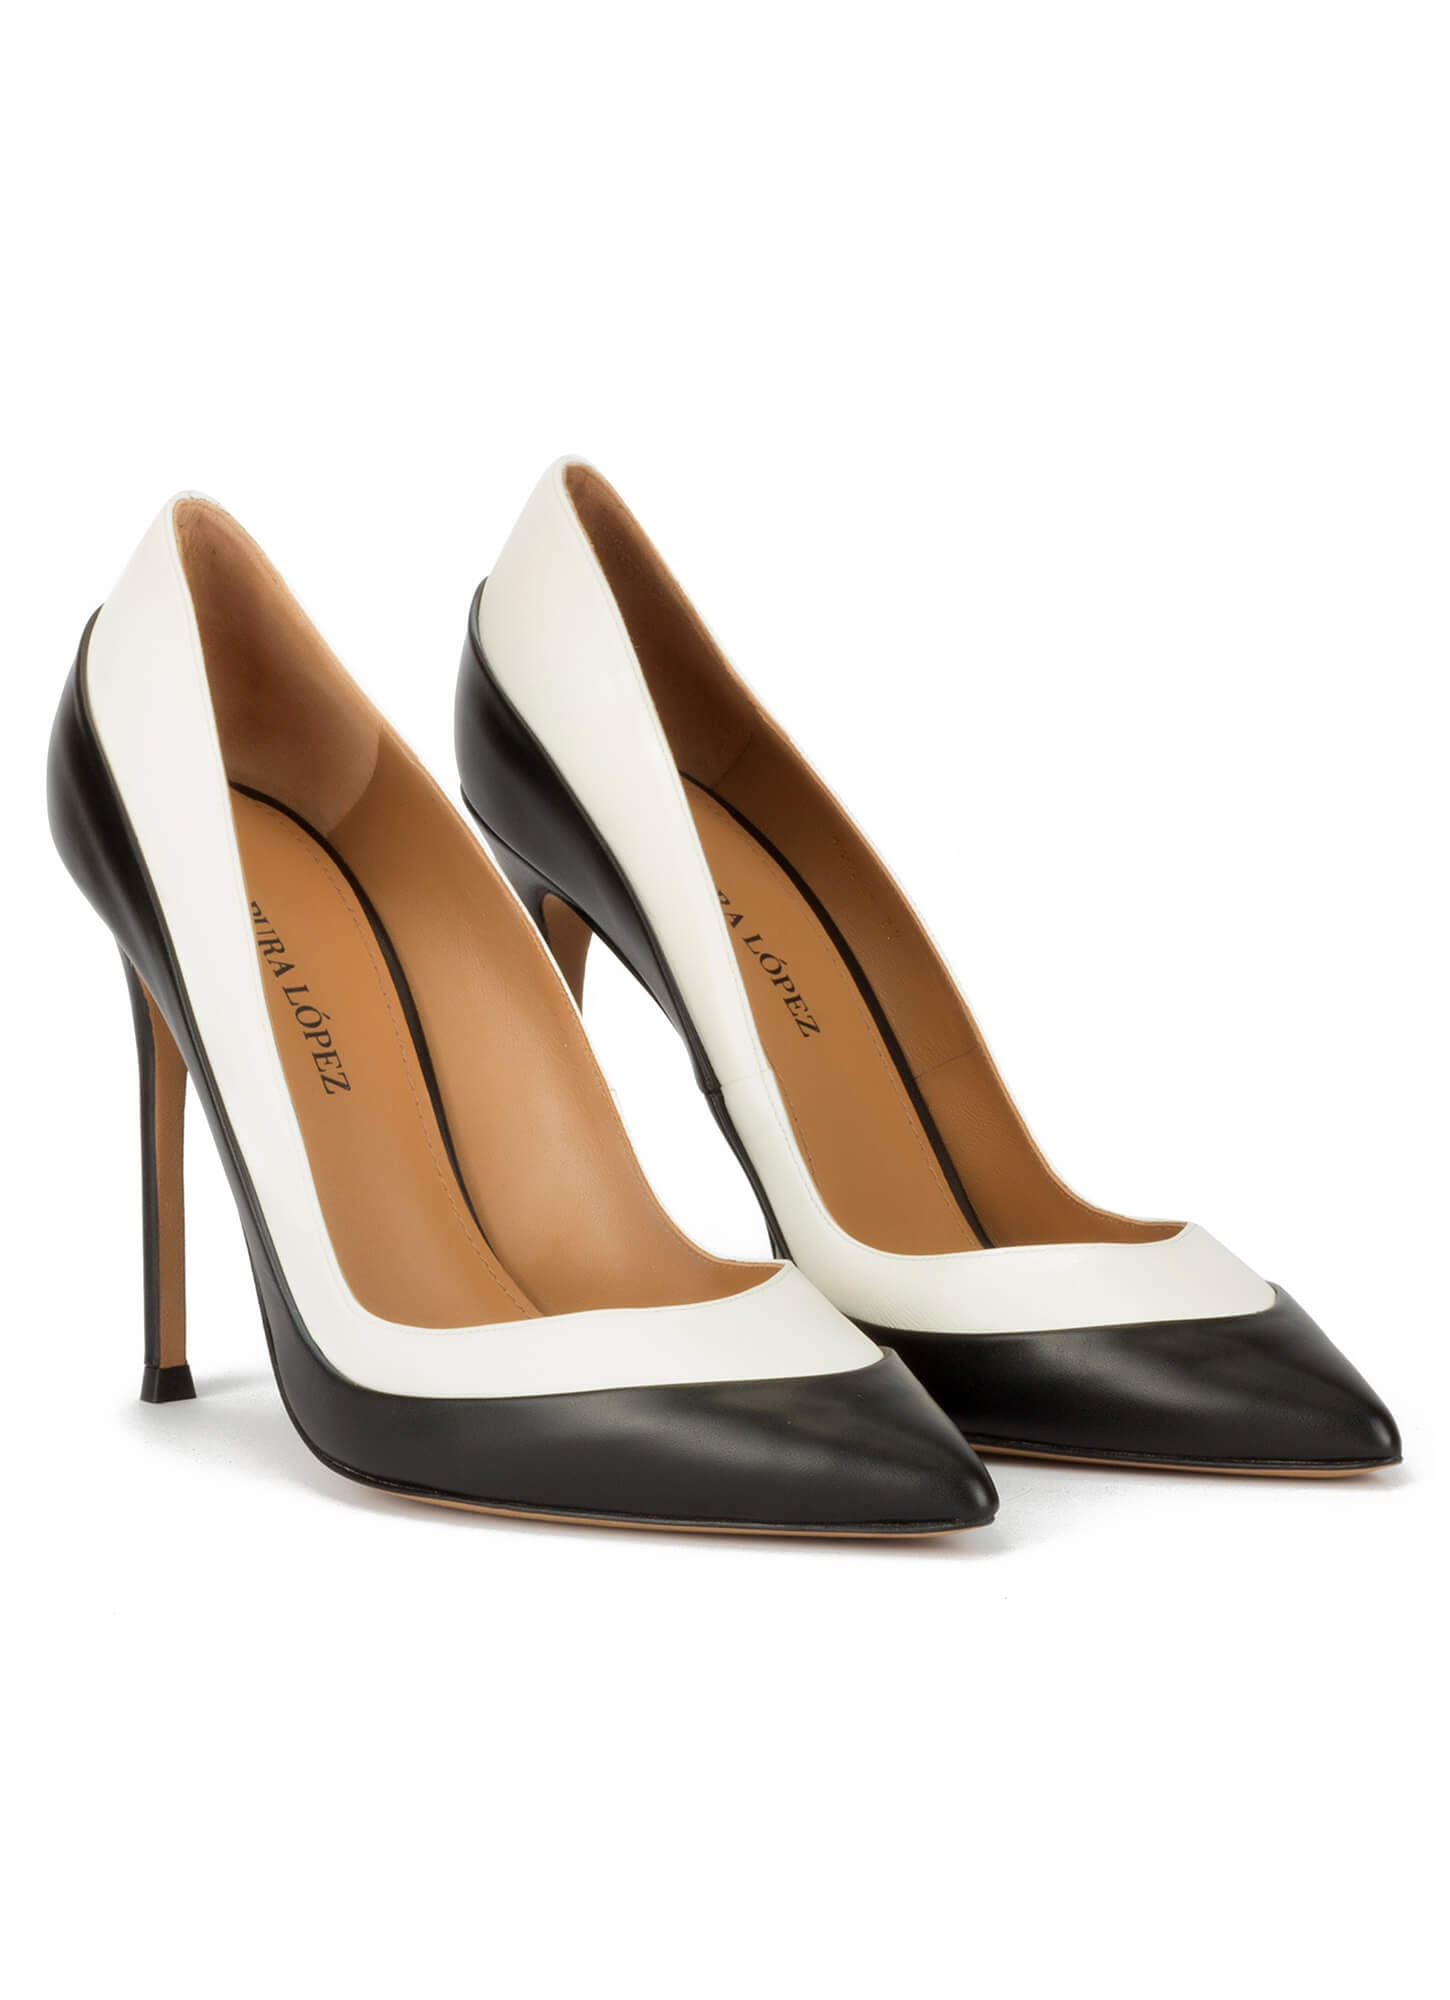 Two-tone high heel pumps in black and white leather . PURA LOPEZ